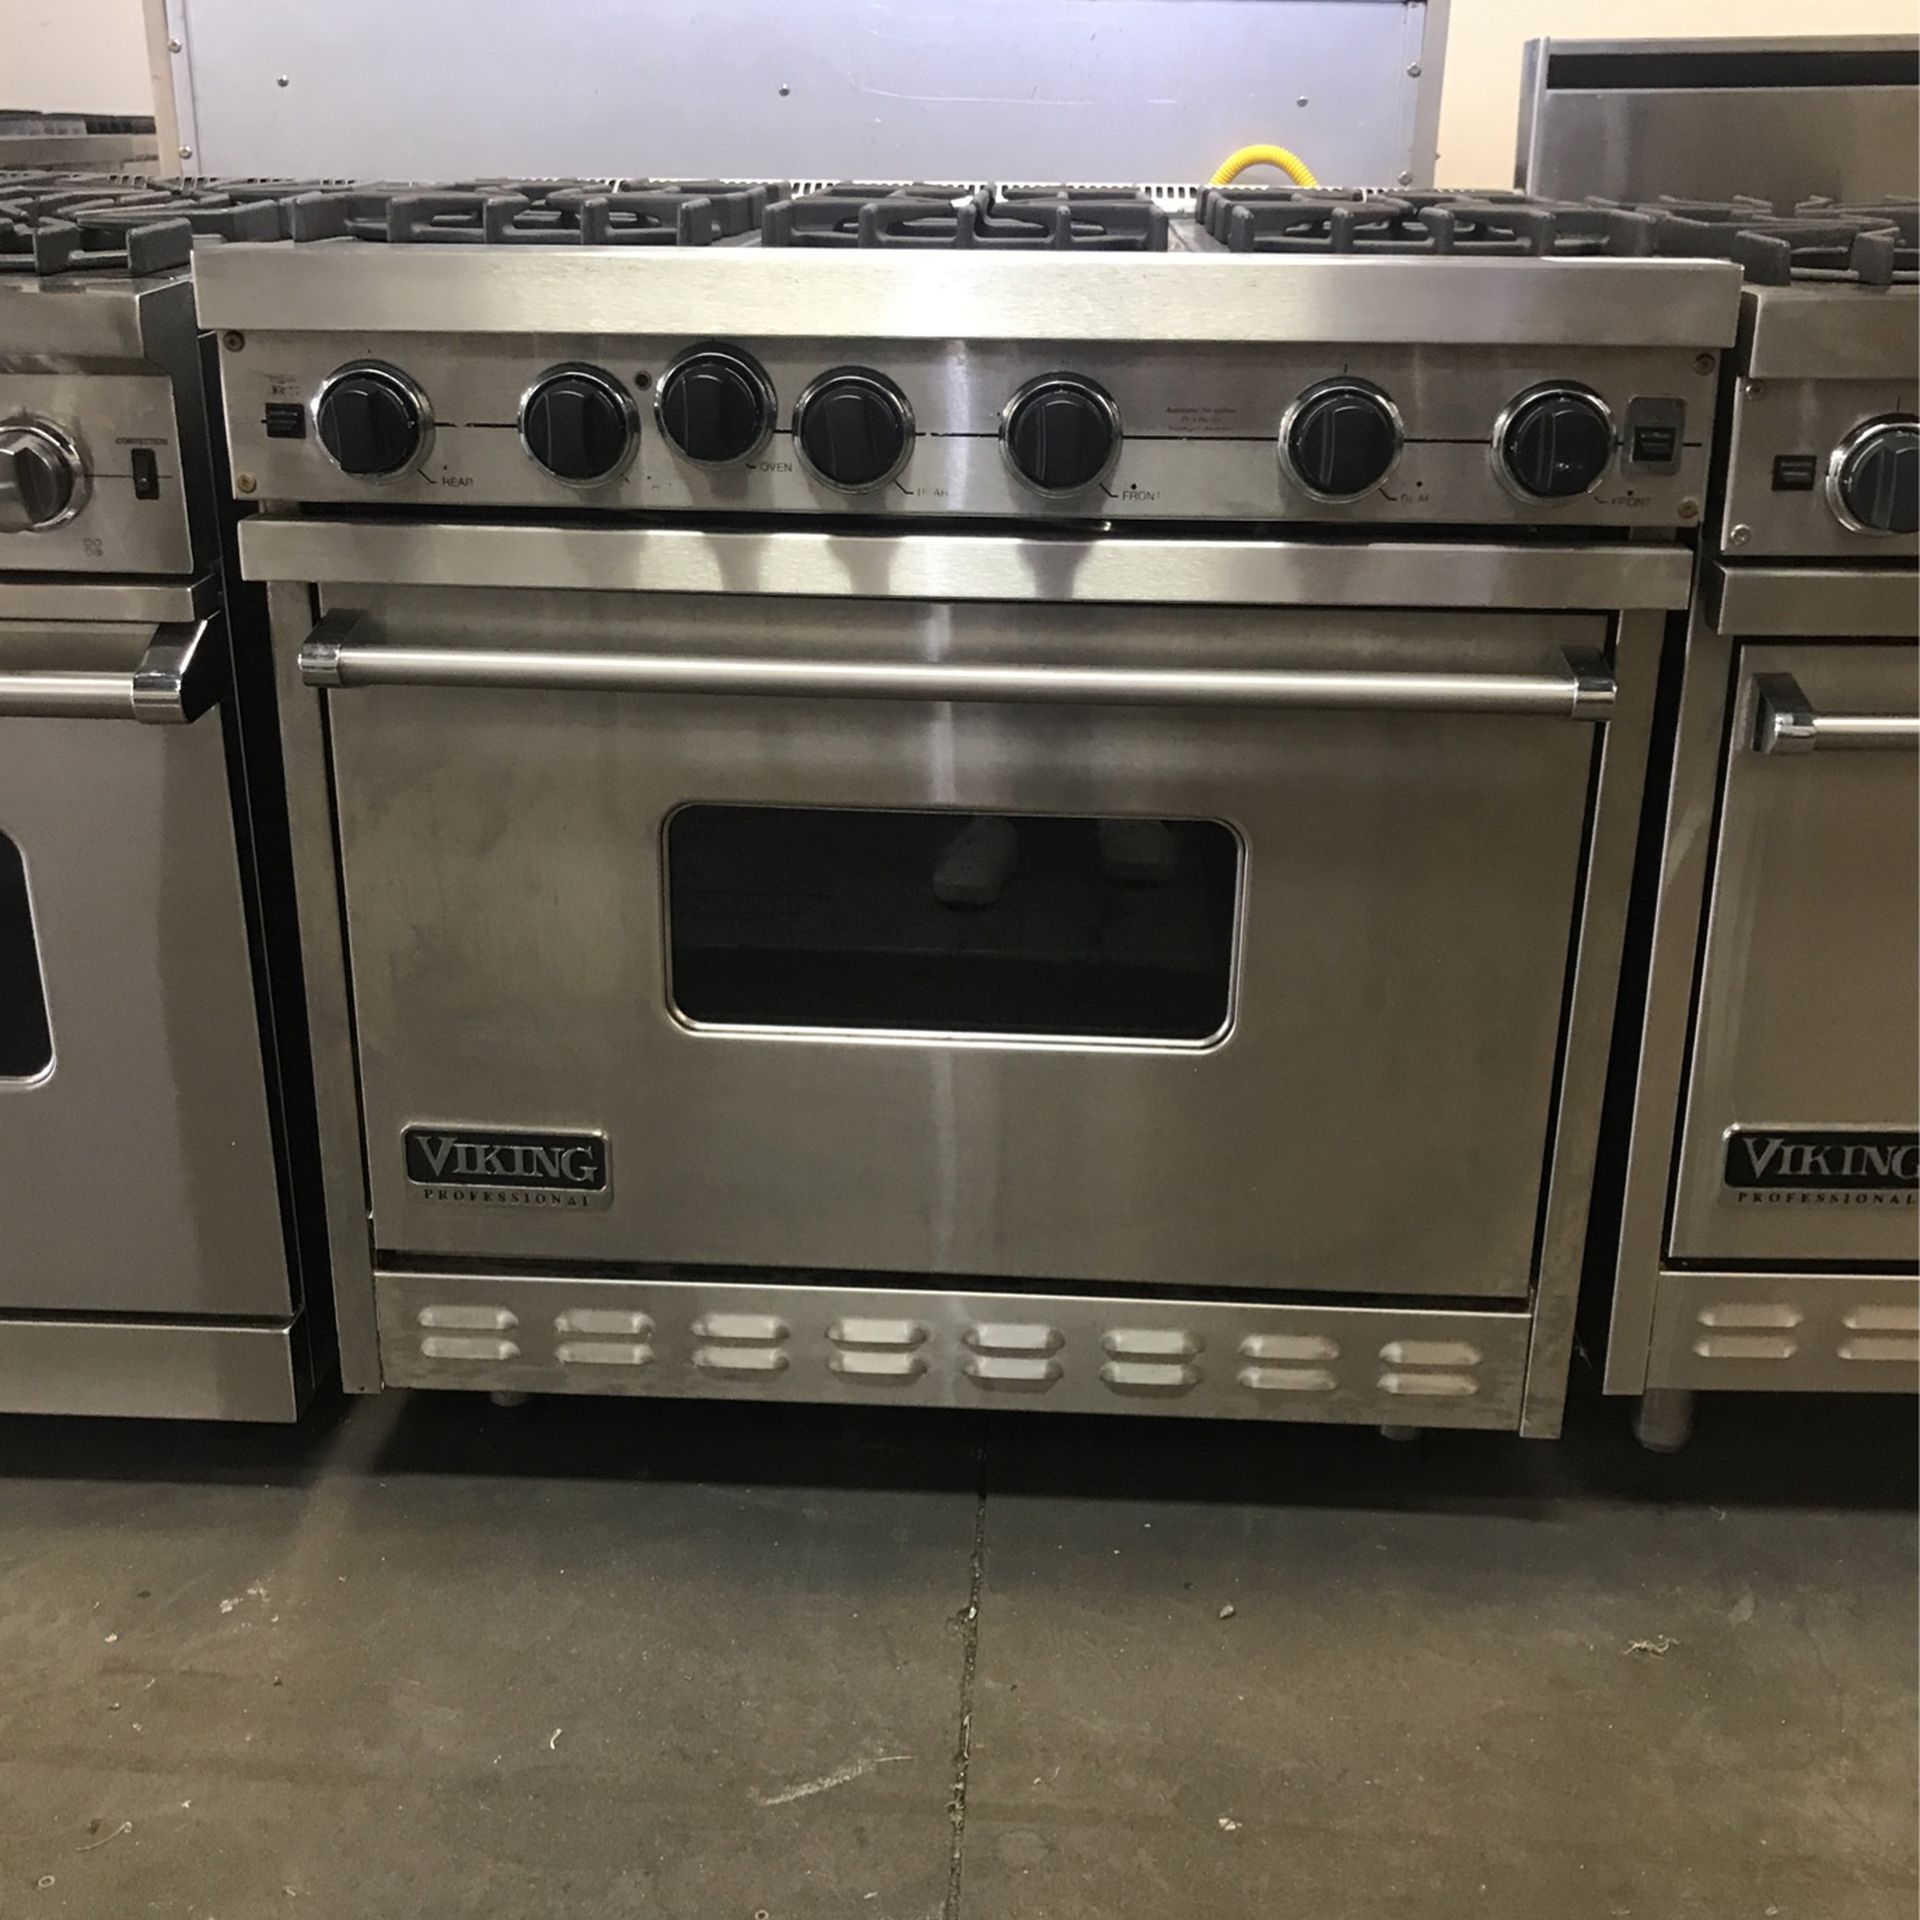 Viking 36”Wide All Gas Range Stove With 6 Burners In Stainless Steel